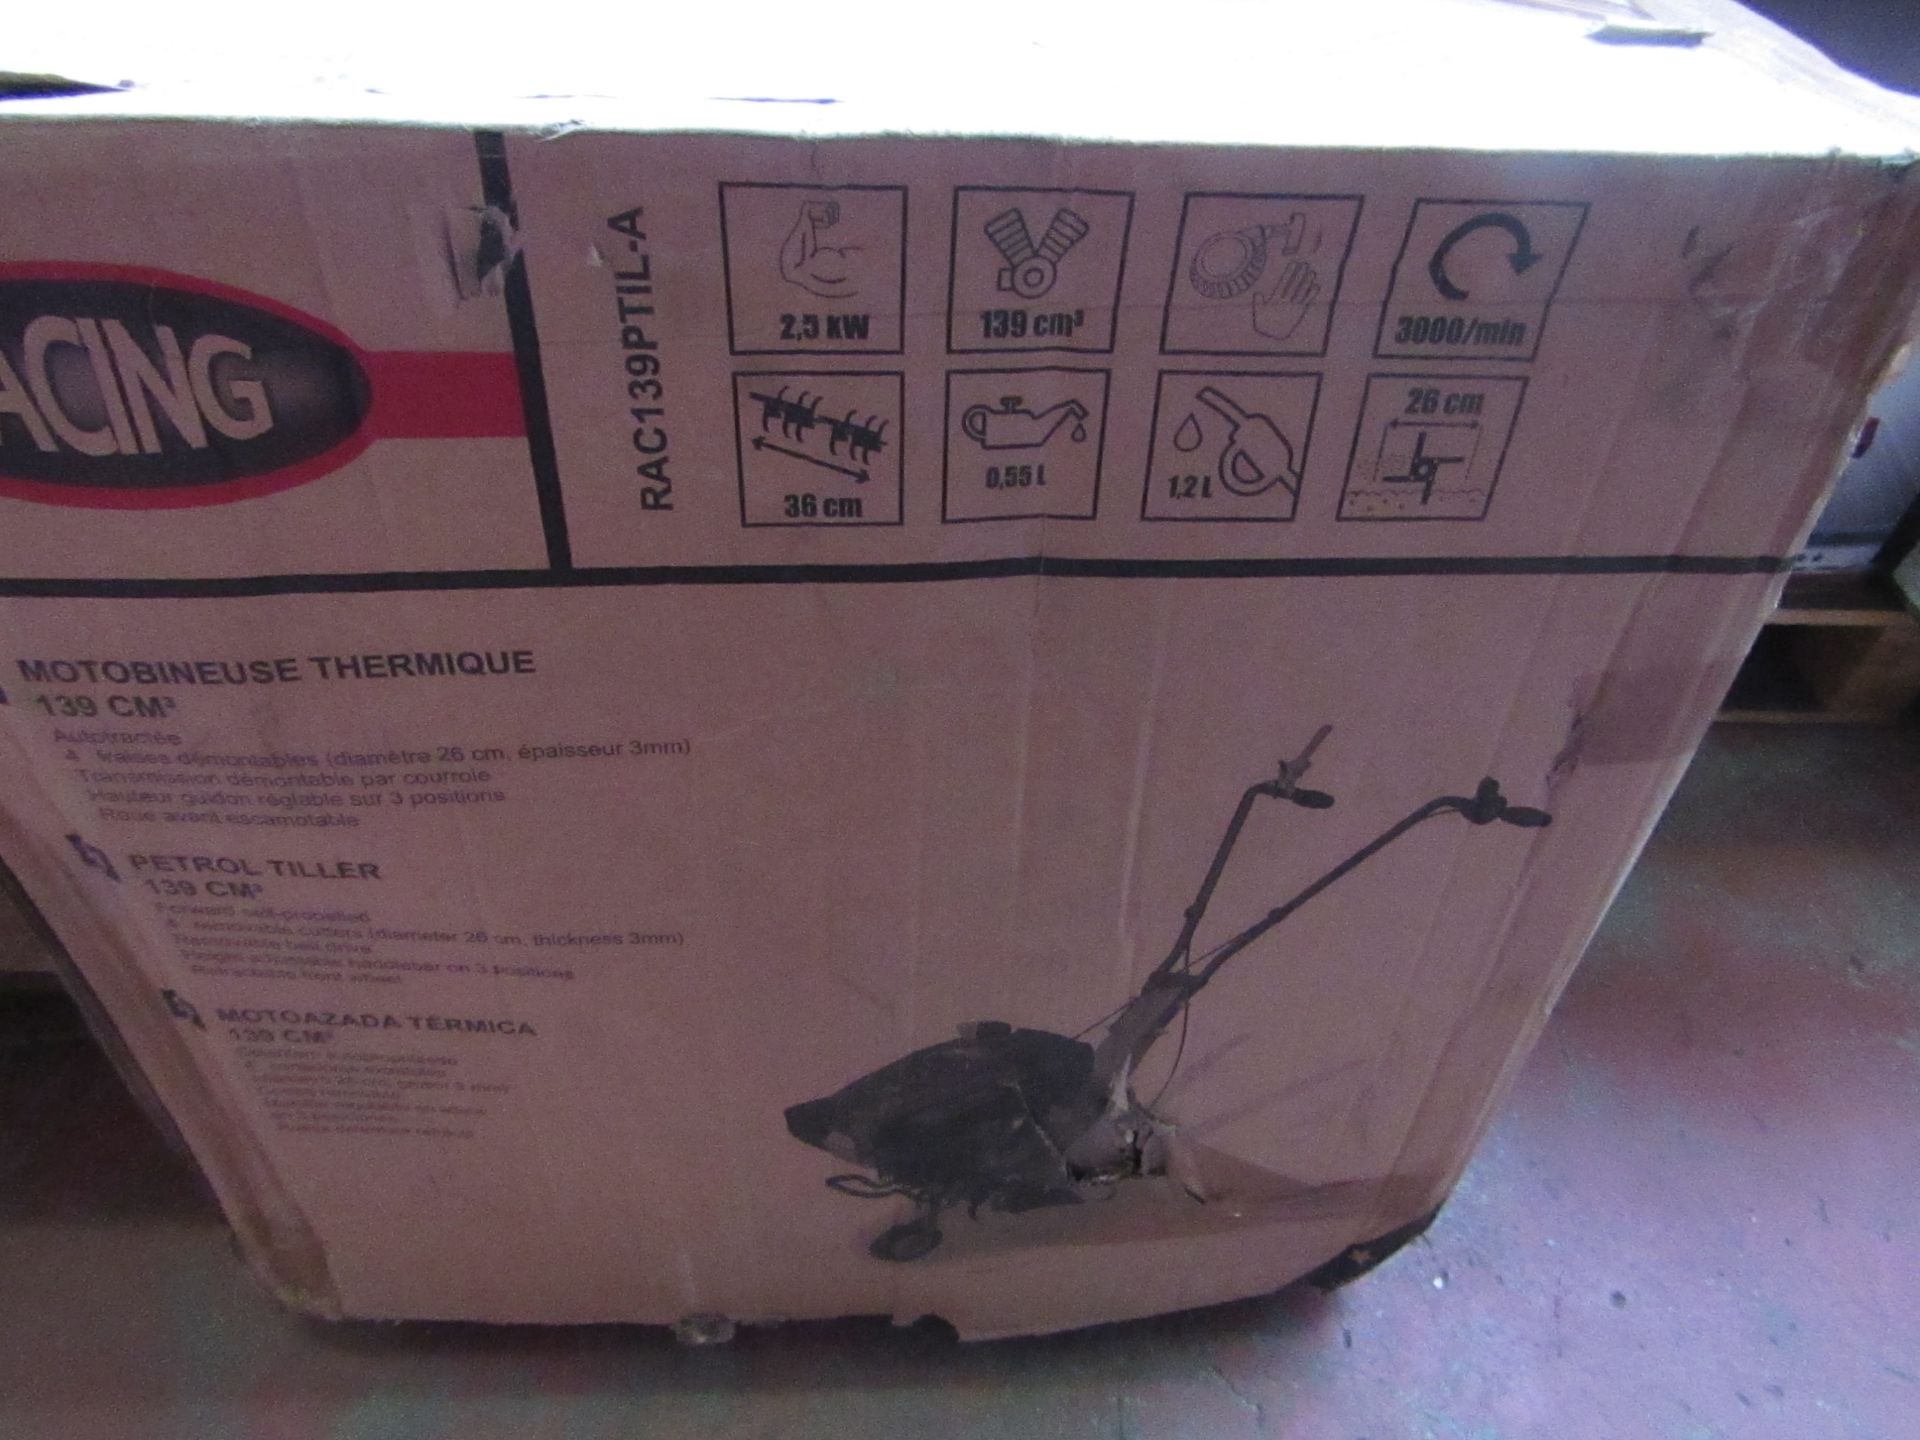 1x Racing motobineuse thermique 139cm3 - unchecked & boxed ( box is damaged ) If unsure please do